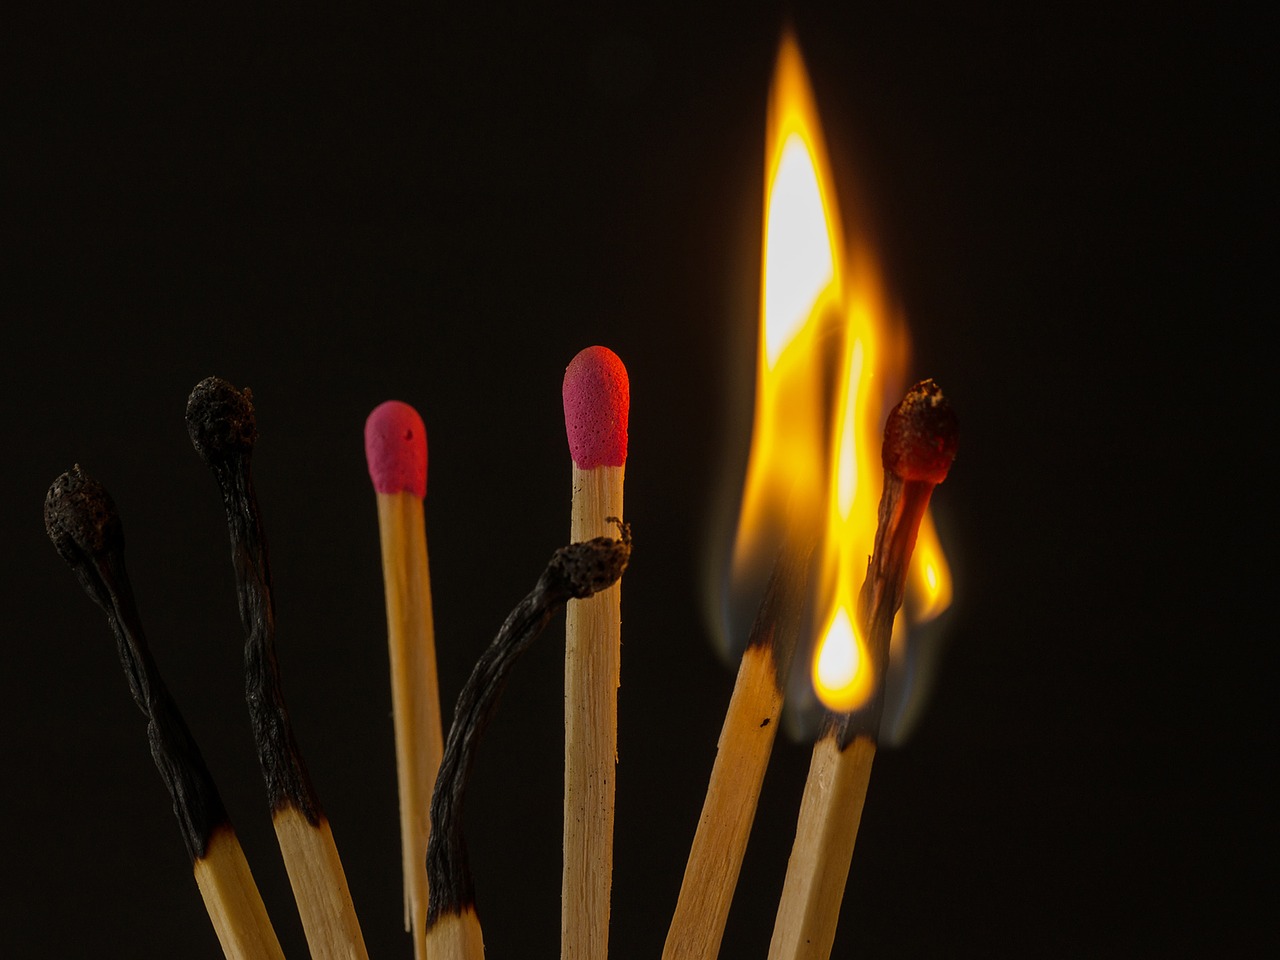 Healing the healers: How COVID-19 has ramped up the clinician burnout crisis